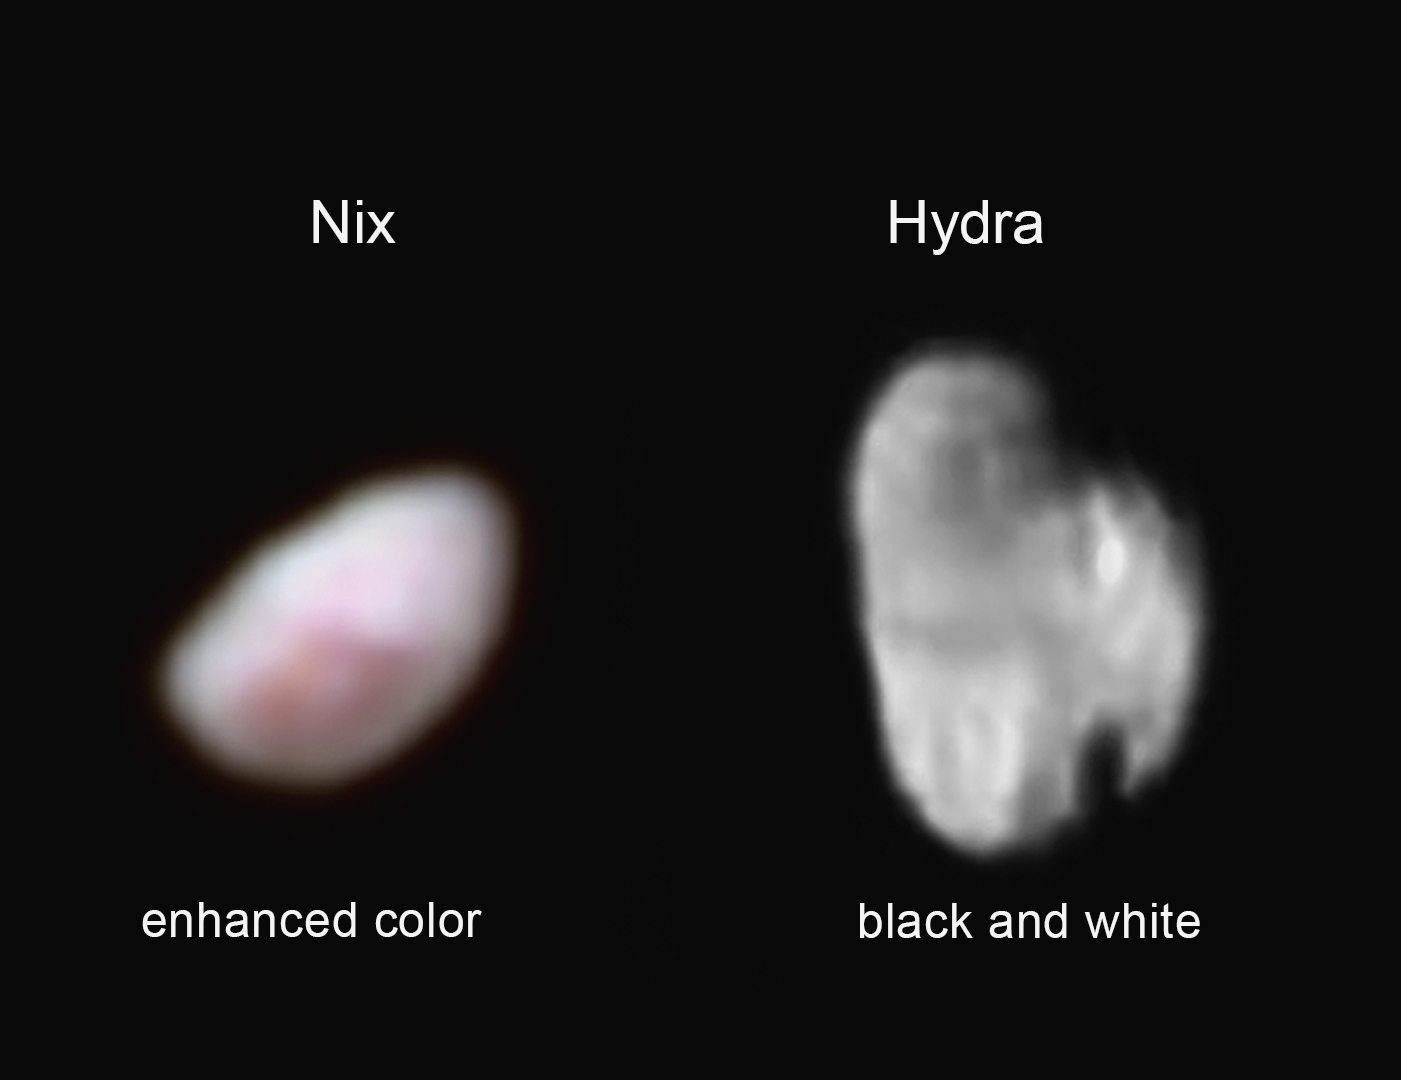 Images of Pluto moons, Nix and Hydra.